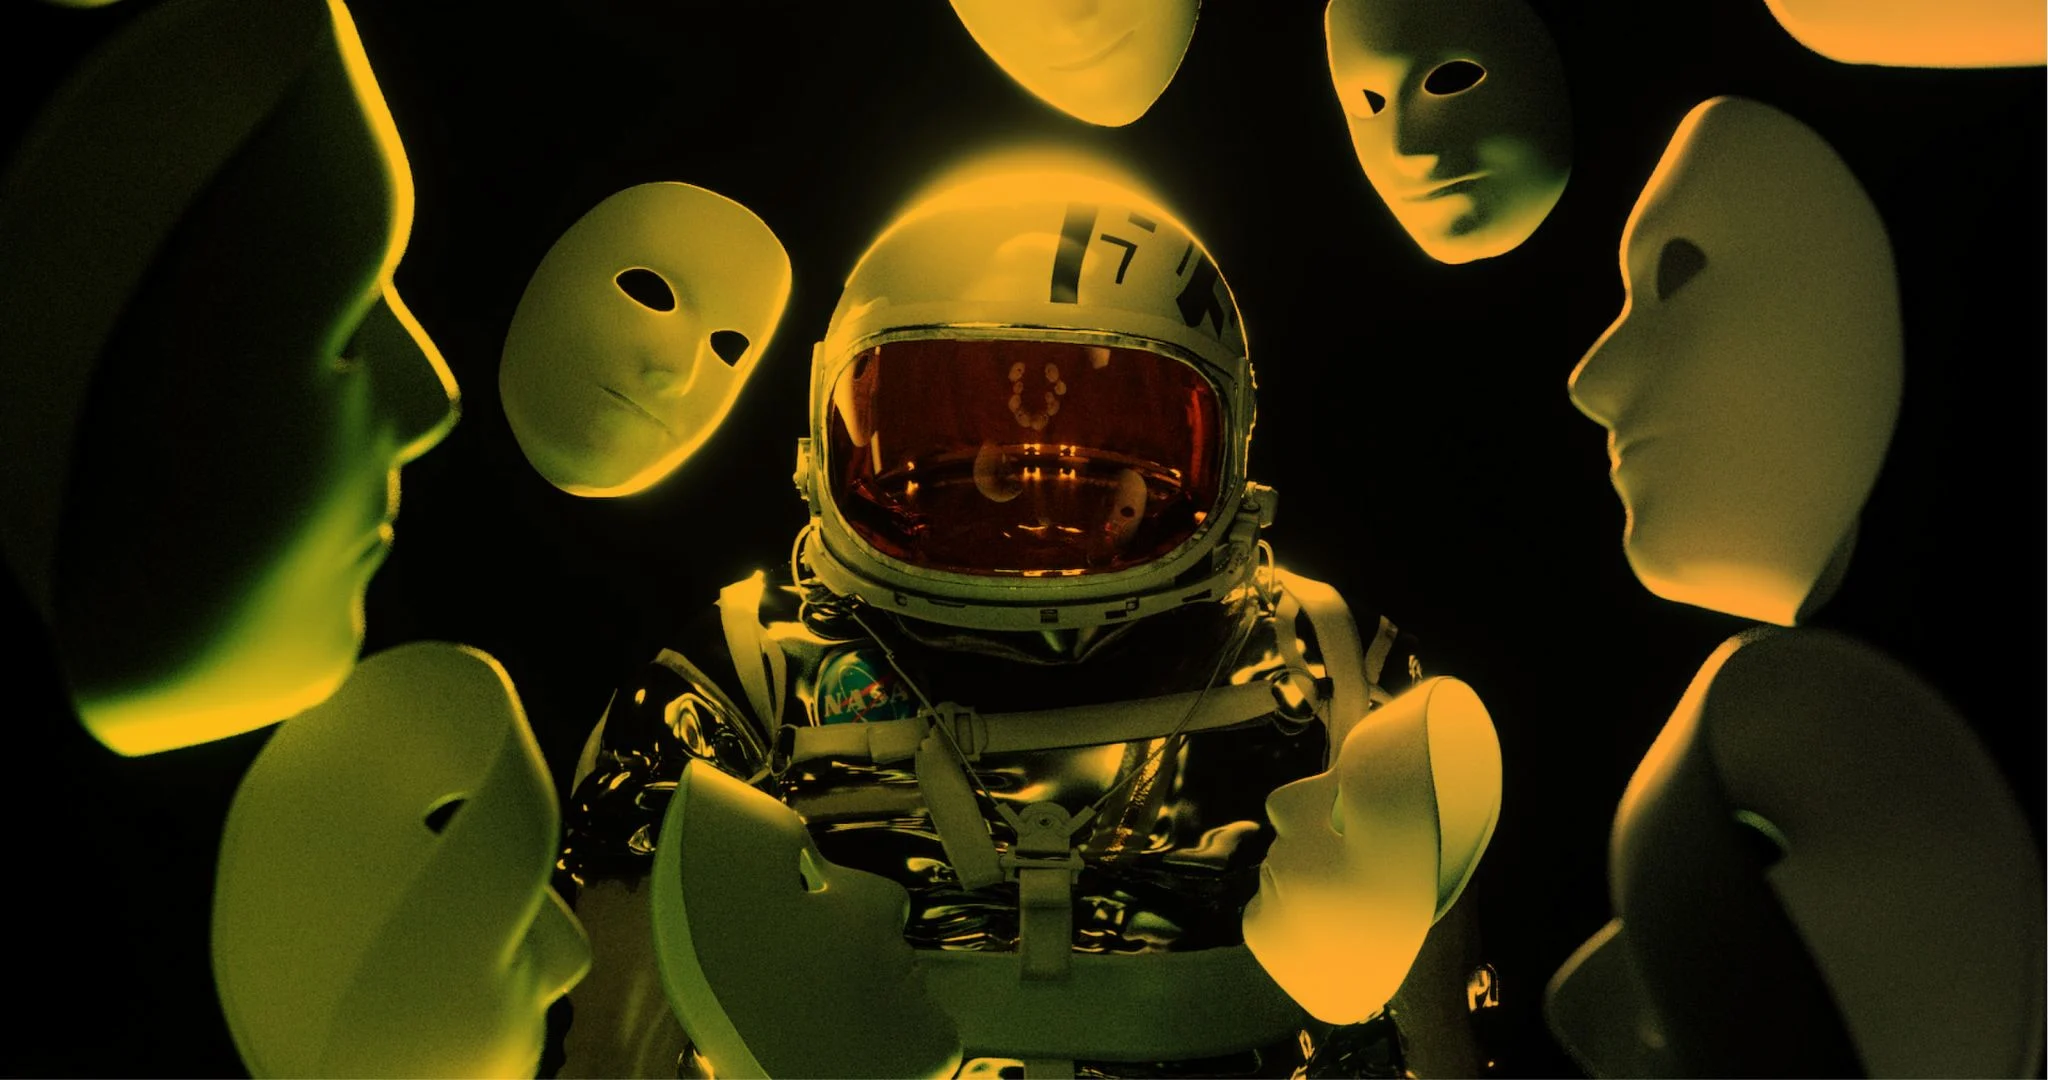 An astronaut amidst leering masks floating in an ominous abyss.